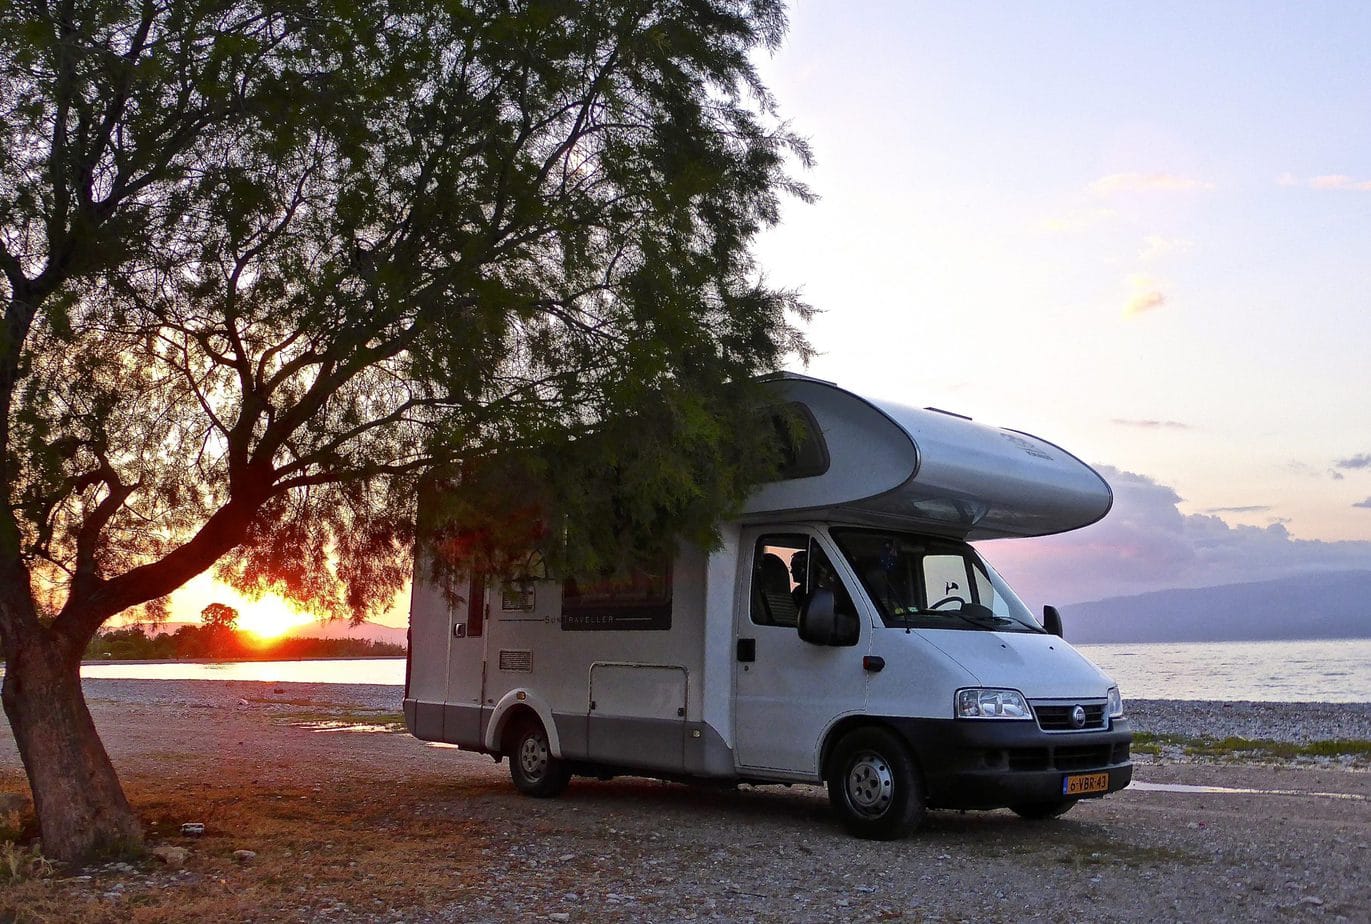 Caravanning in the wild – how to travel by campervan without camping?